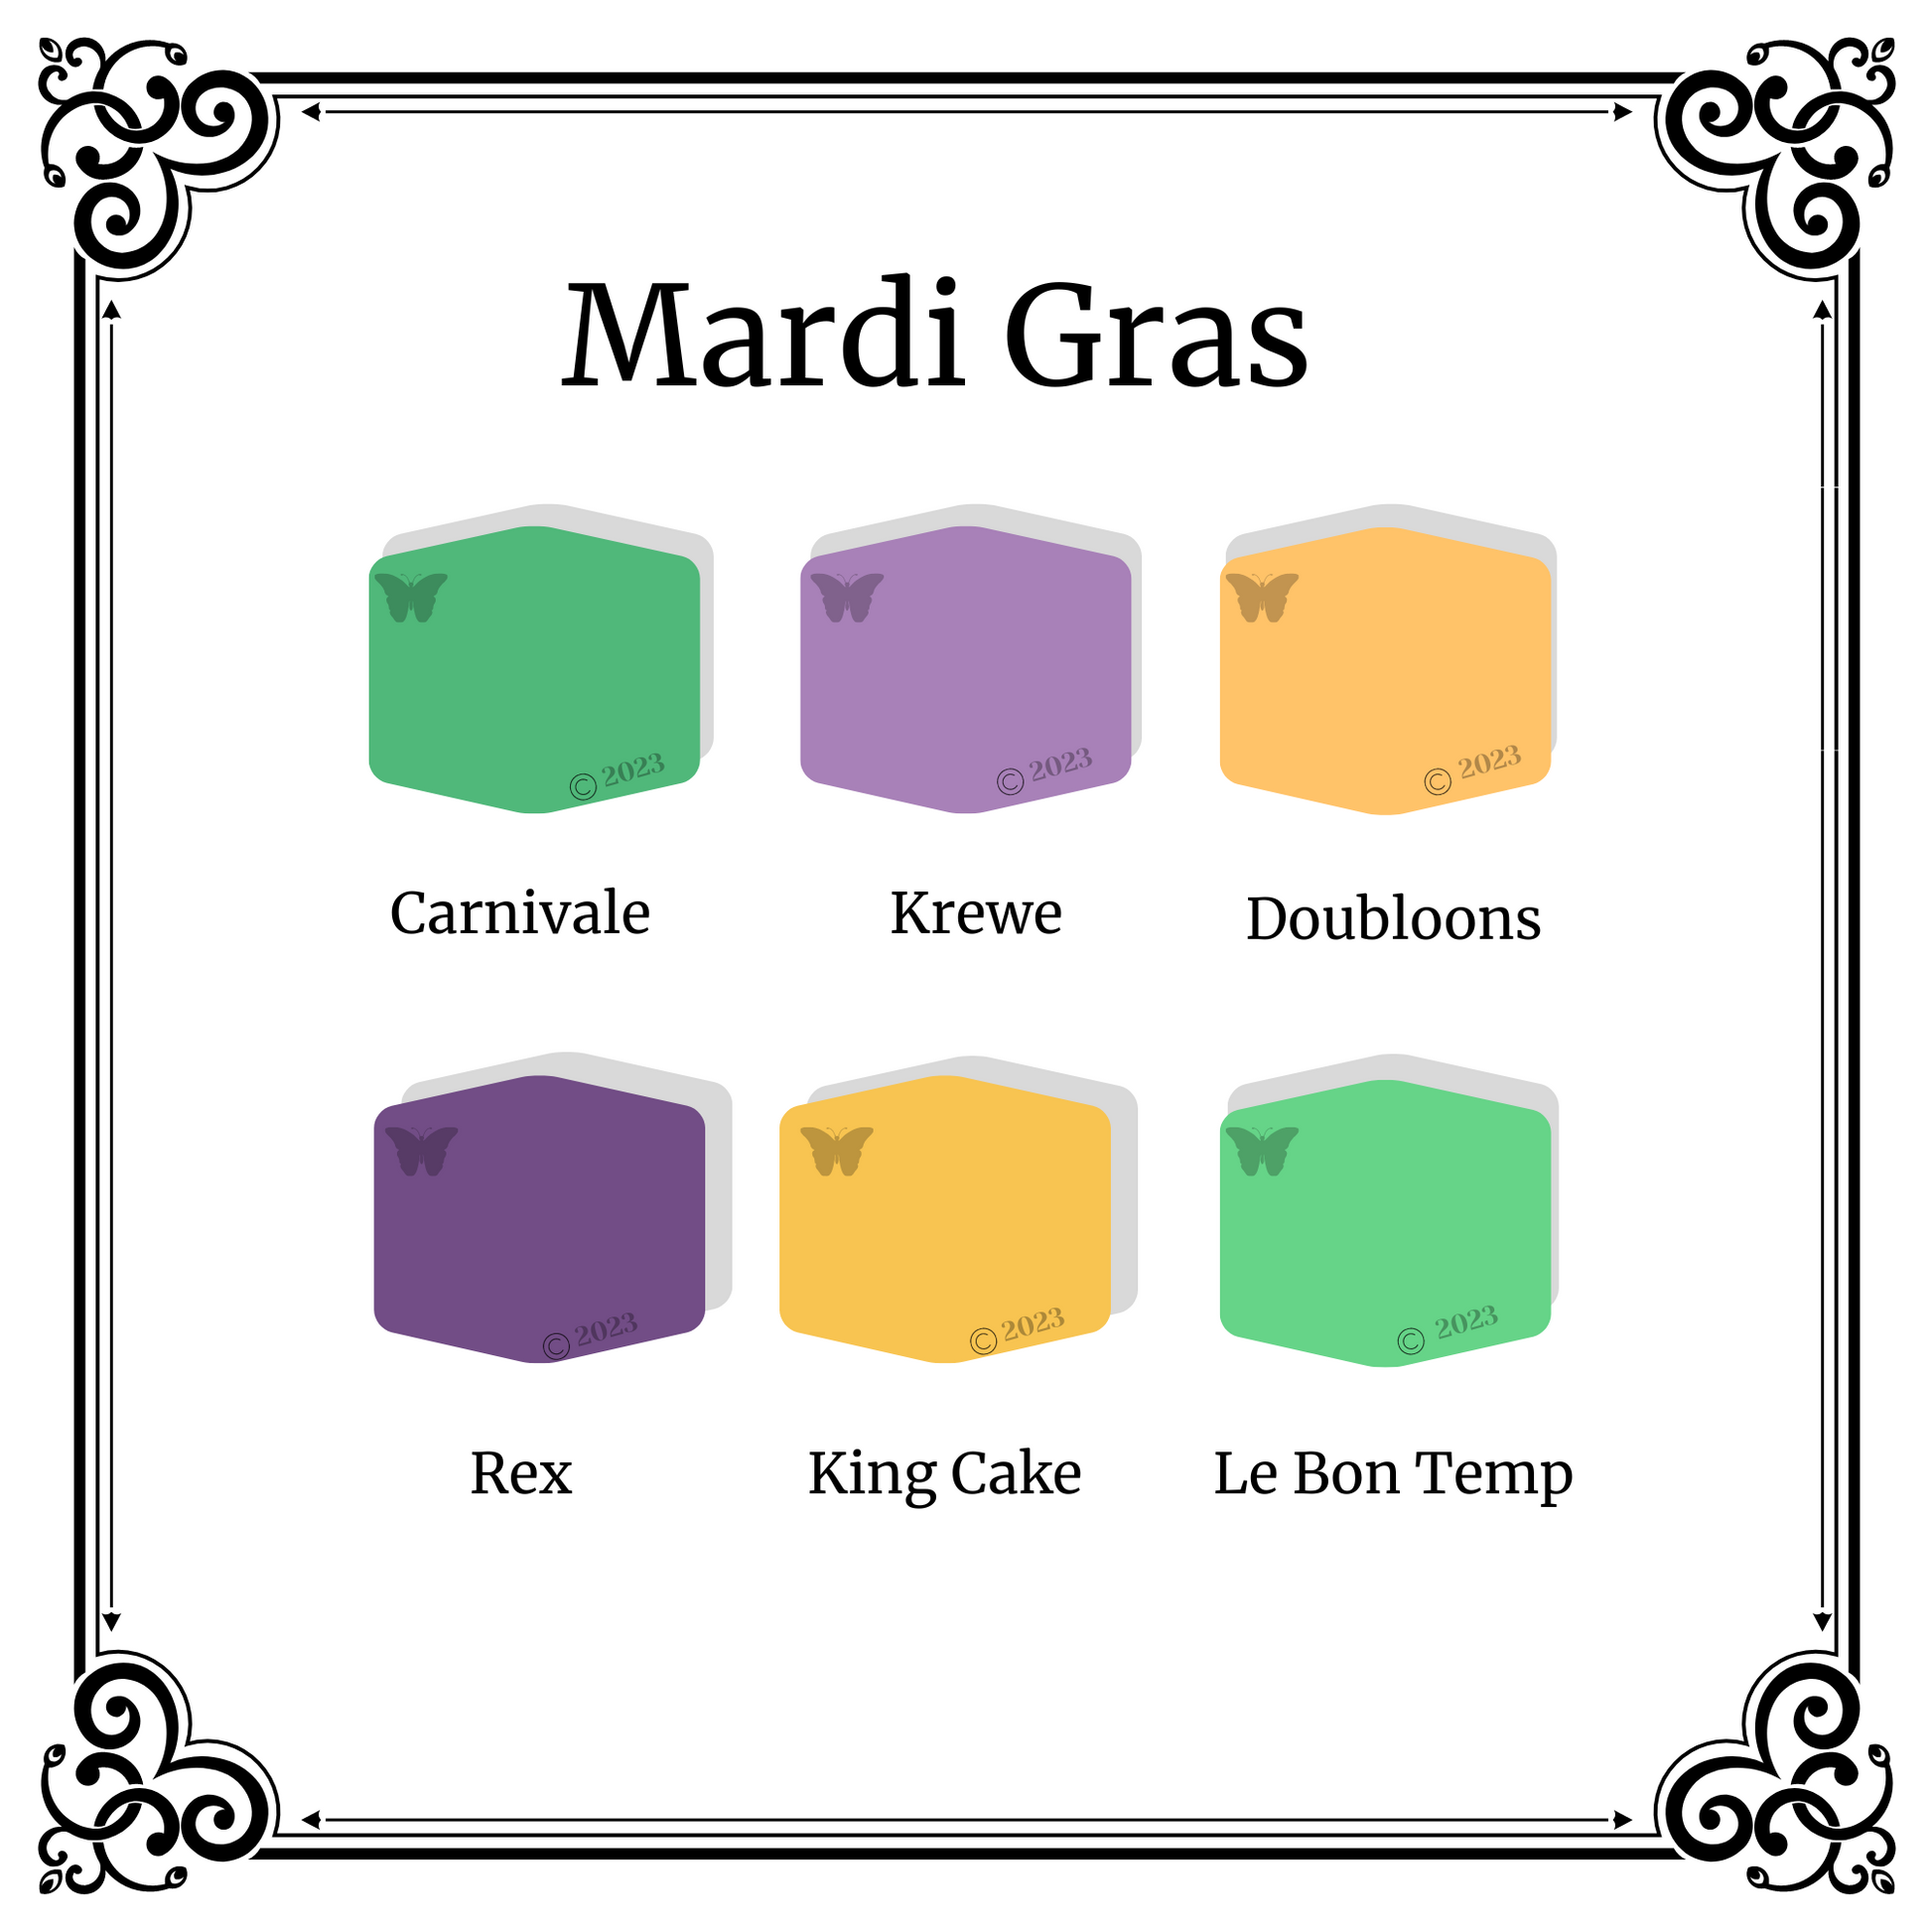 Polymer Clay Color Palette Mardi Gras.  A black and white Victorian frame around 6 hexagons in shades of green, gold,  and purple.   The title is Mardi Gras and the 6 colors are Carnivale, Krewe, Doubloons, Rex, King Cake and Le Bon Temp